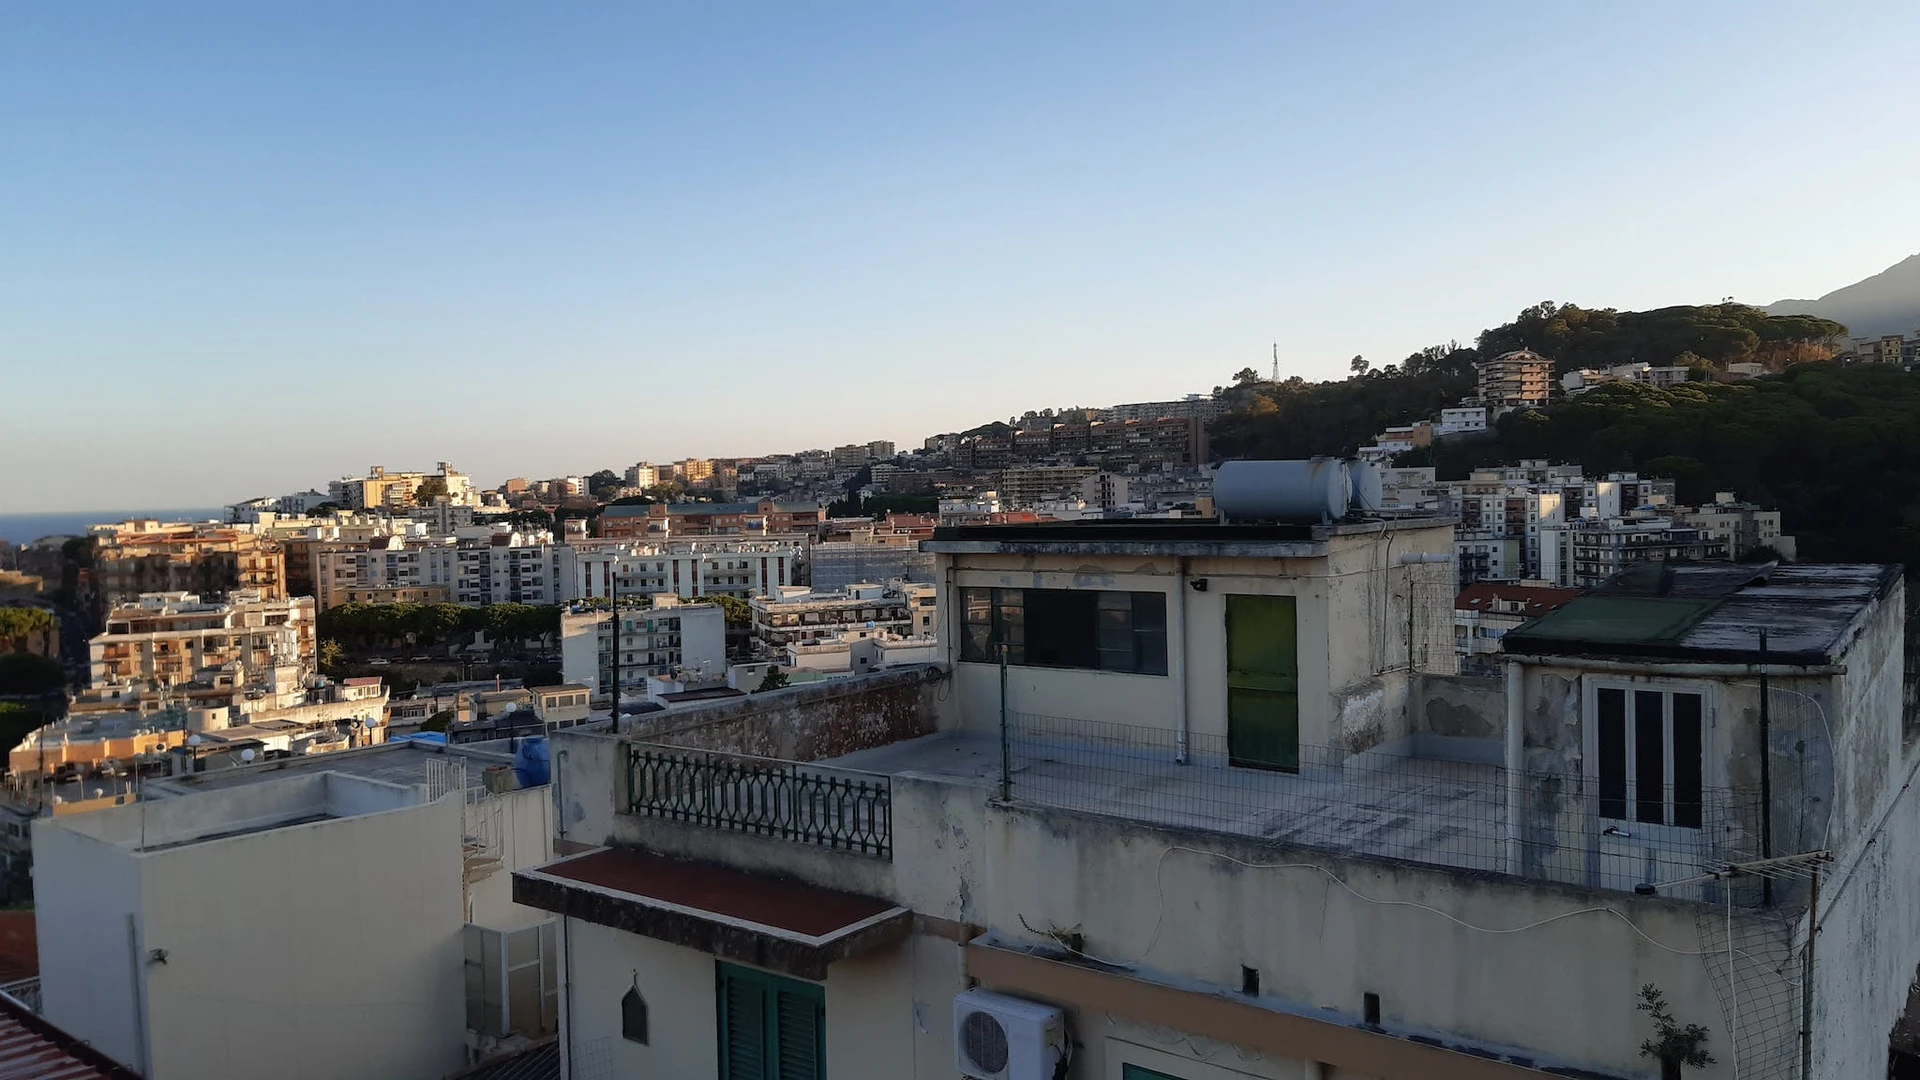 Room for rent in a shared flat in Messina